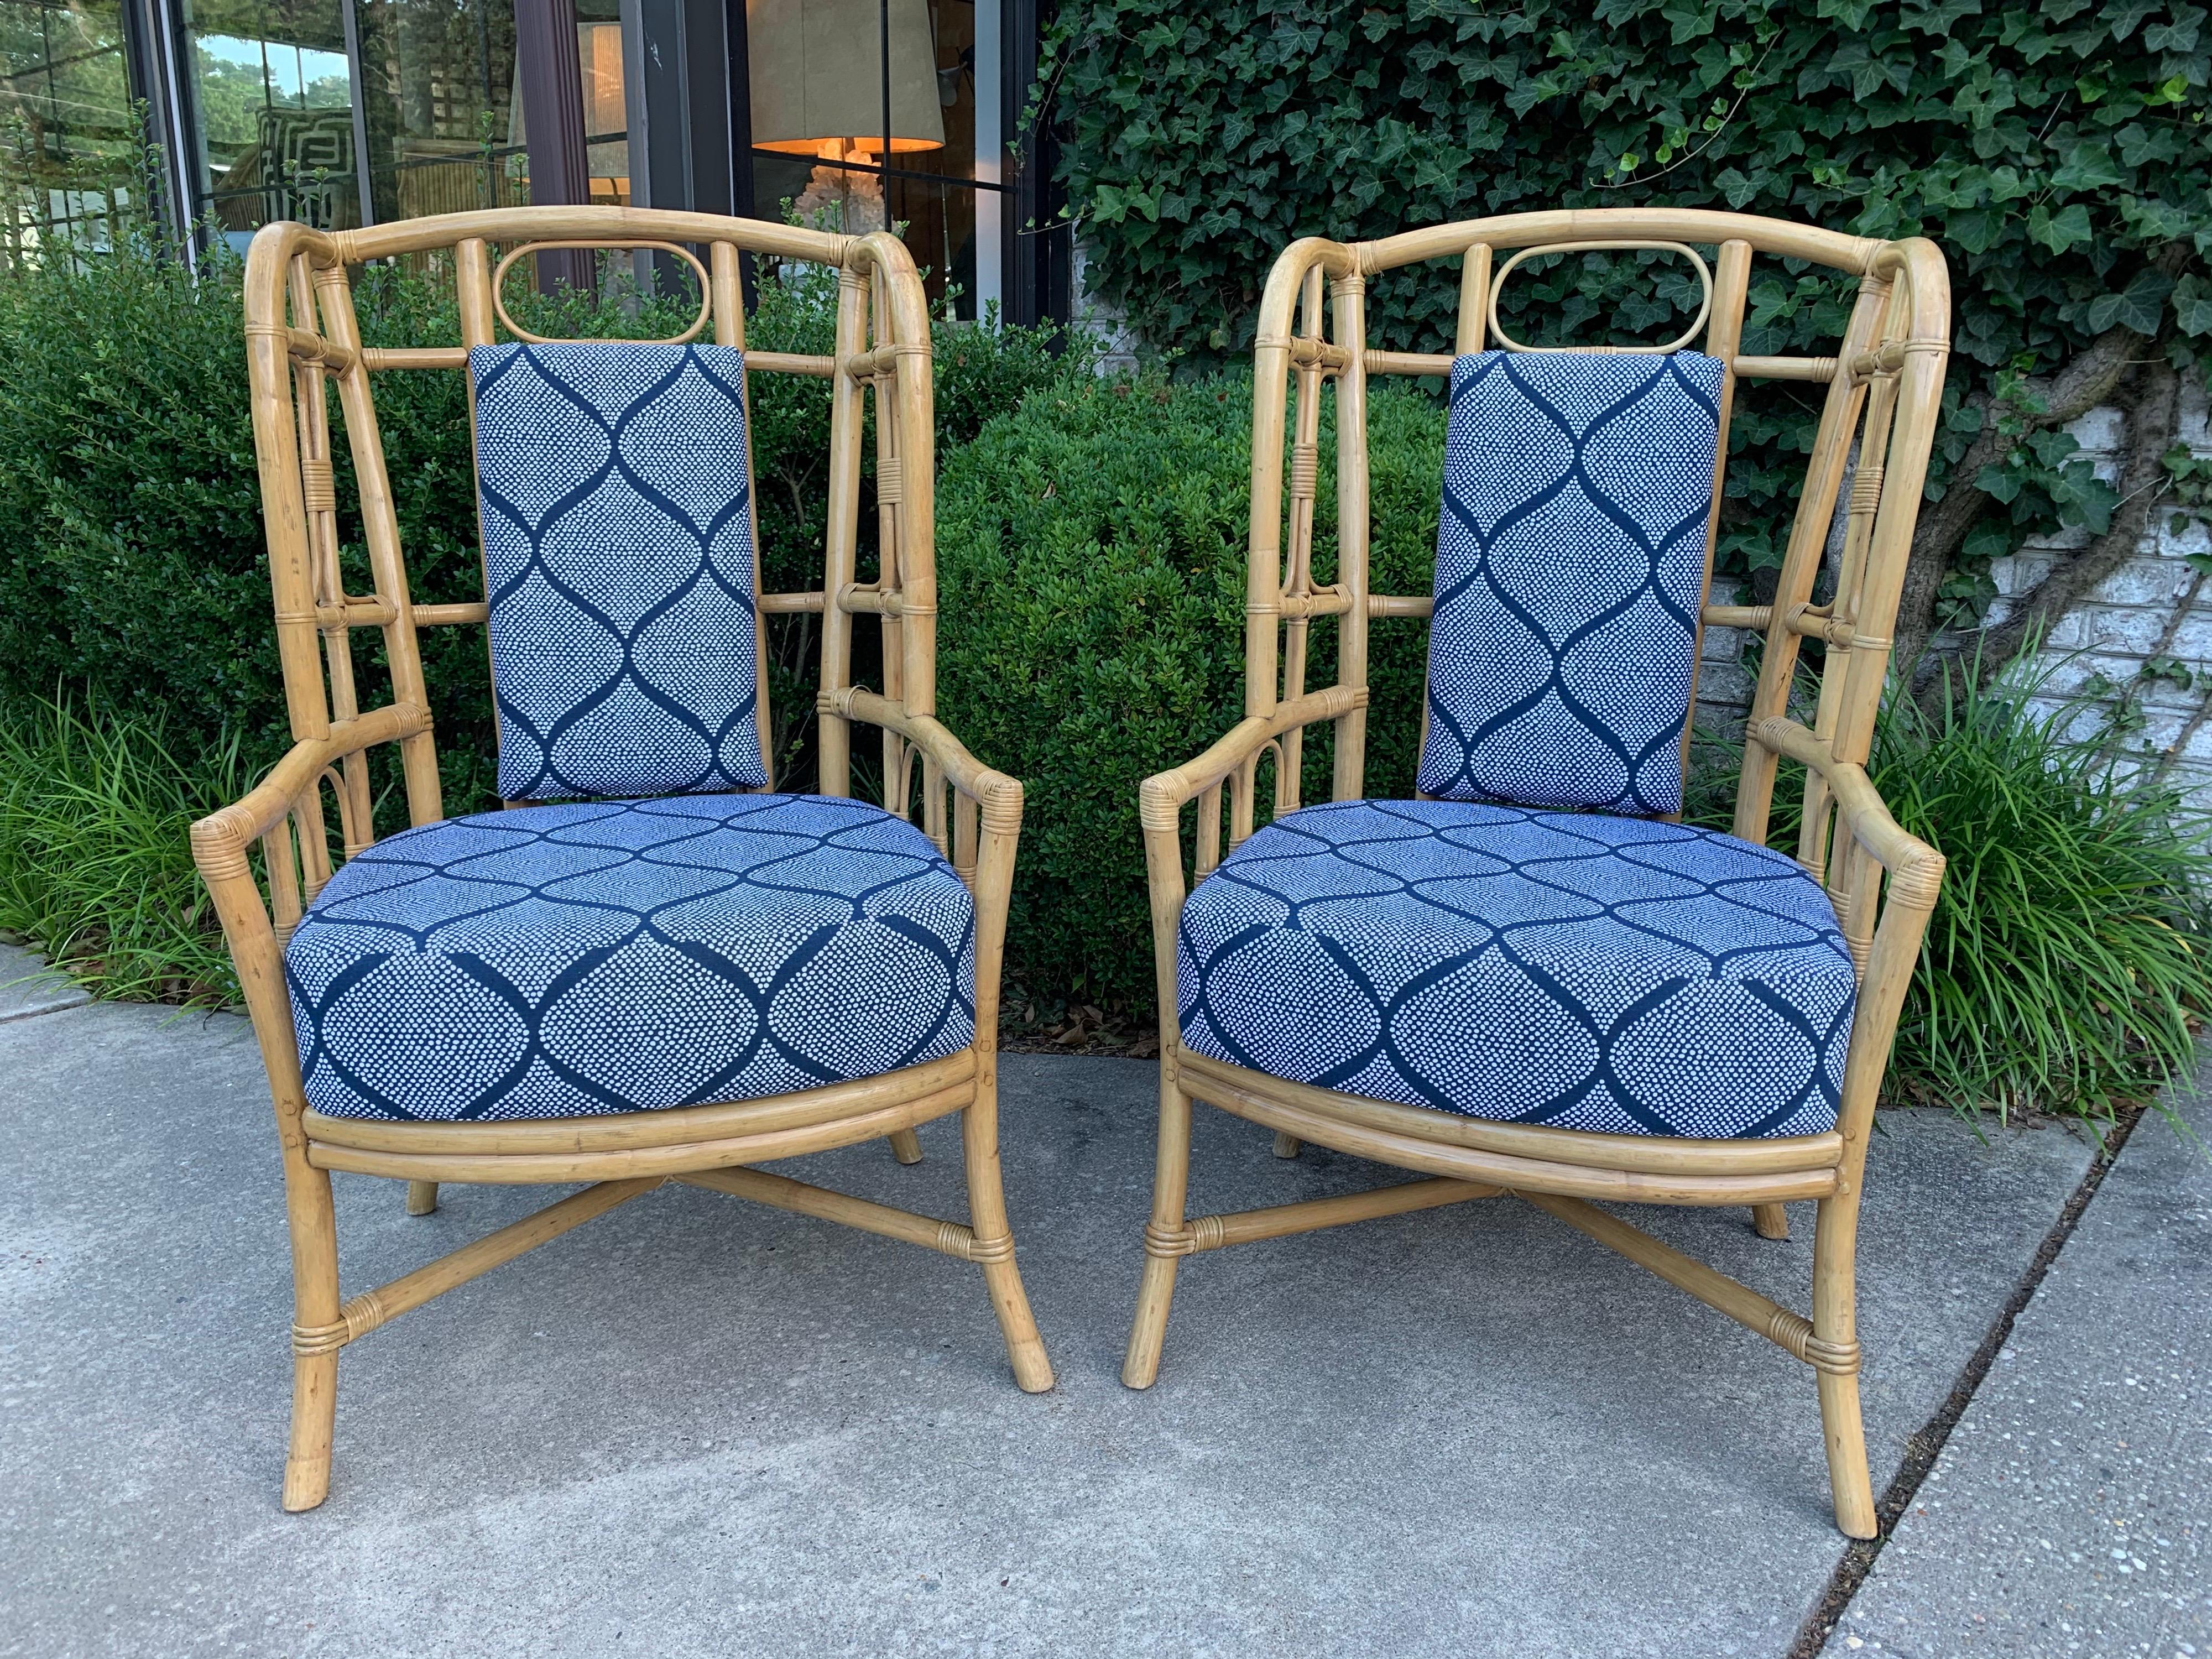 These boho chic bamboo flared wing armchairs with graphic oval design to back. Newly reupholstered in Sunbrella fabric. Back cushion is removable if desired with Velcro straps. Very Caribbean and solid framed chairs.

Measures: Seat height is 20